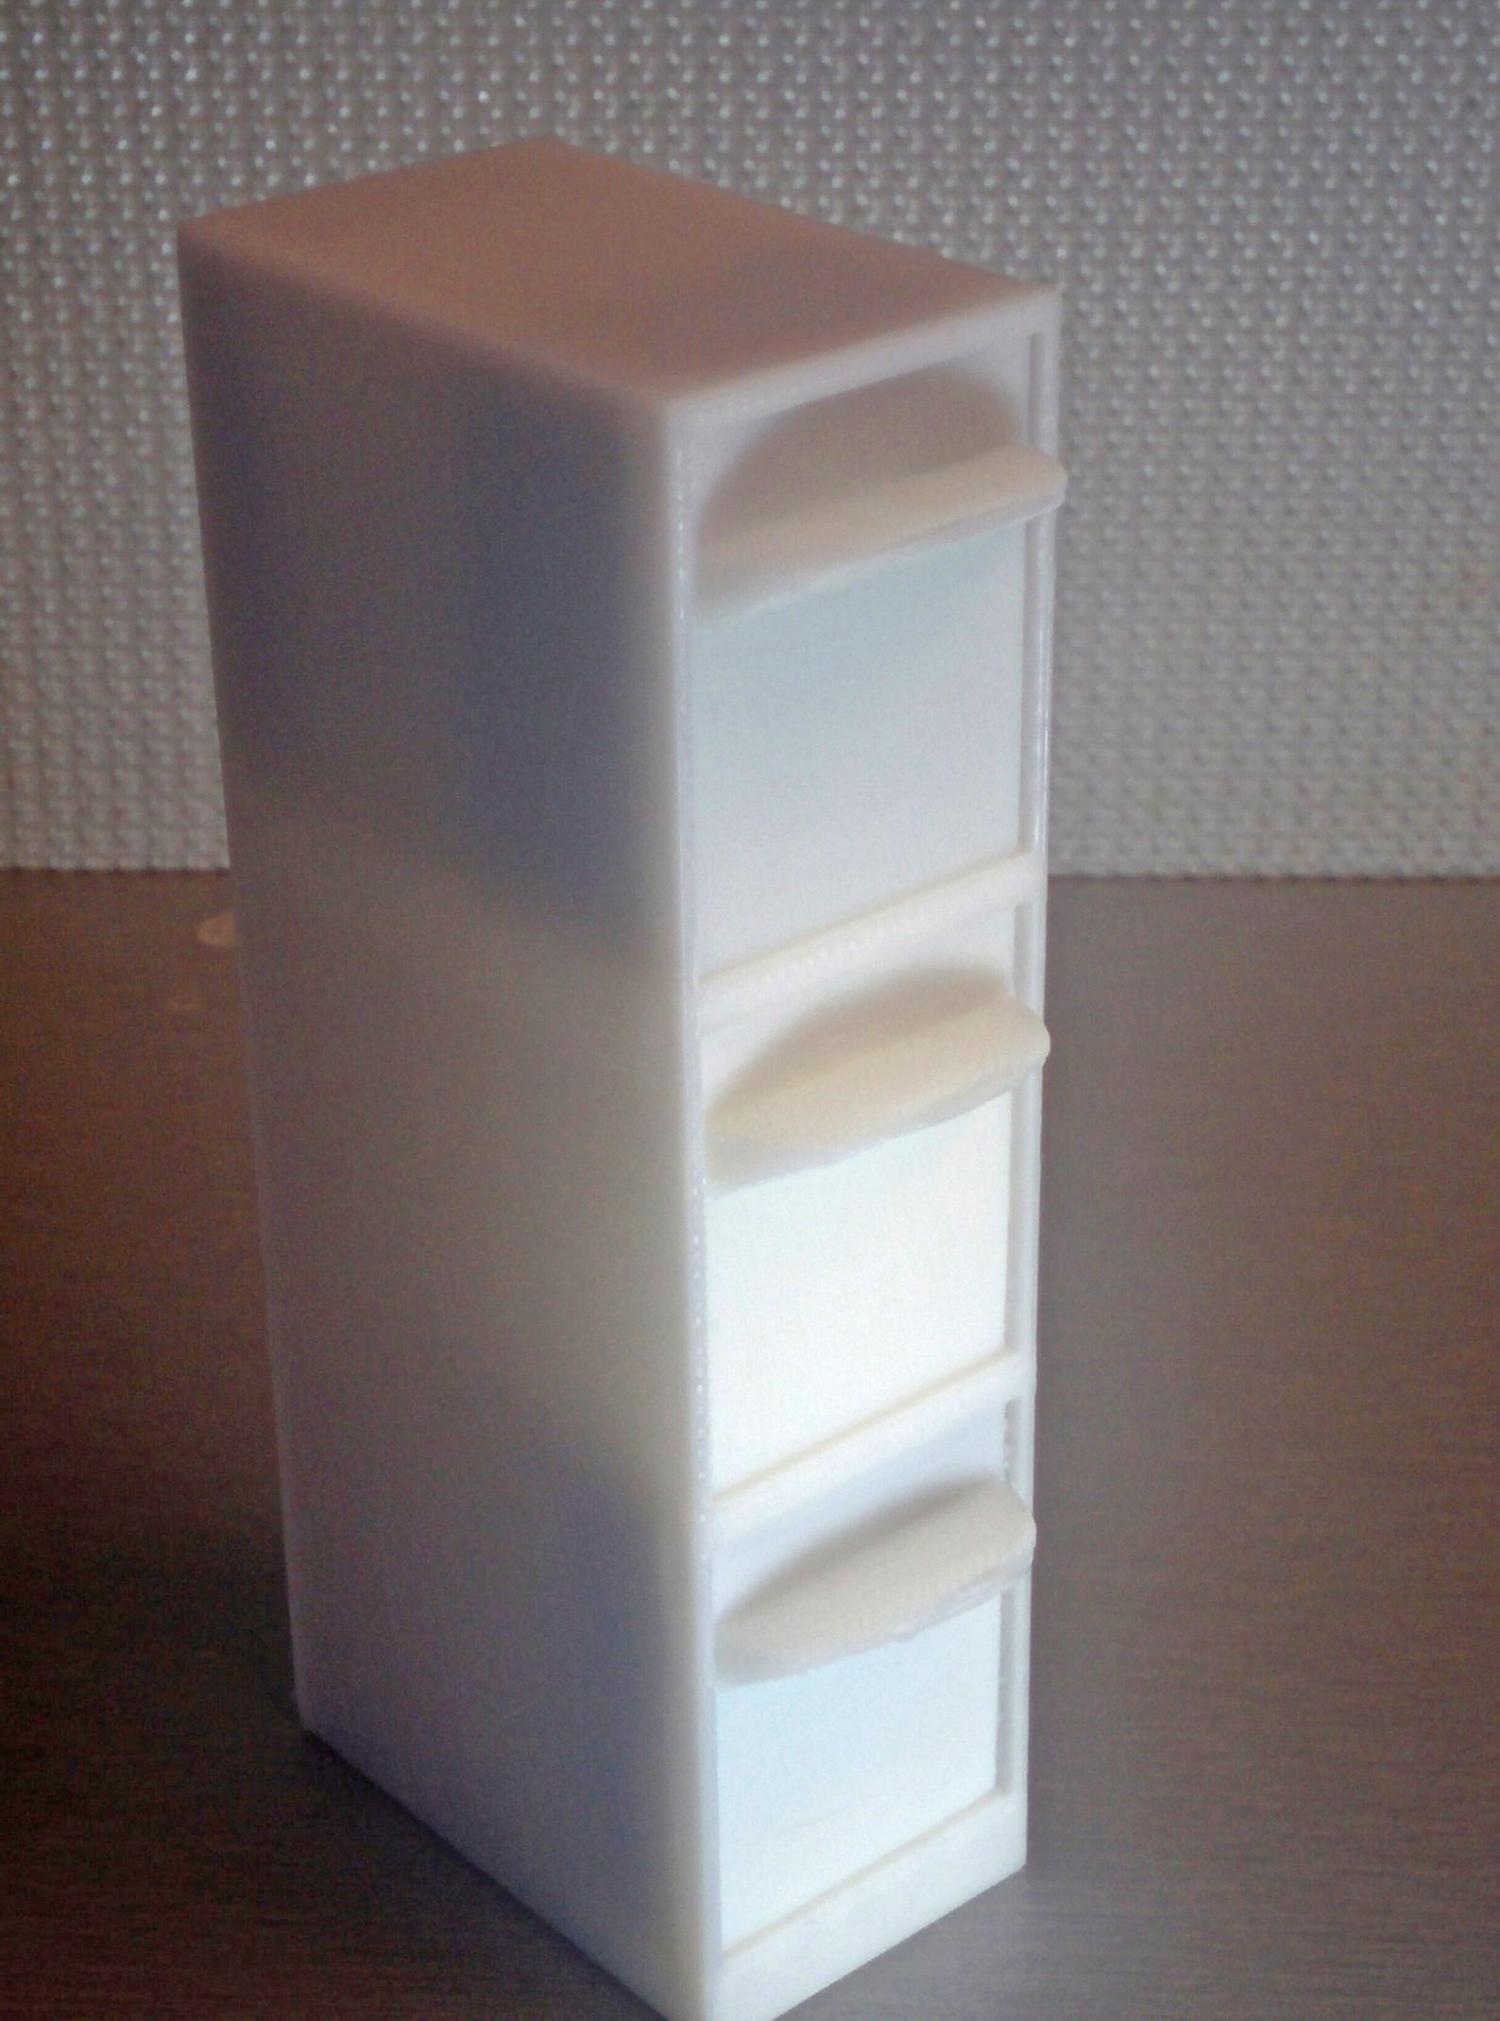 Tiny Filing Cabinet For SD Cards - 3D Printed Mini Filing Cabinet that holds micro SD cards